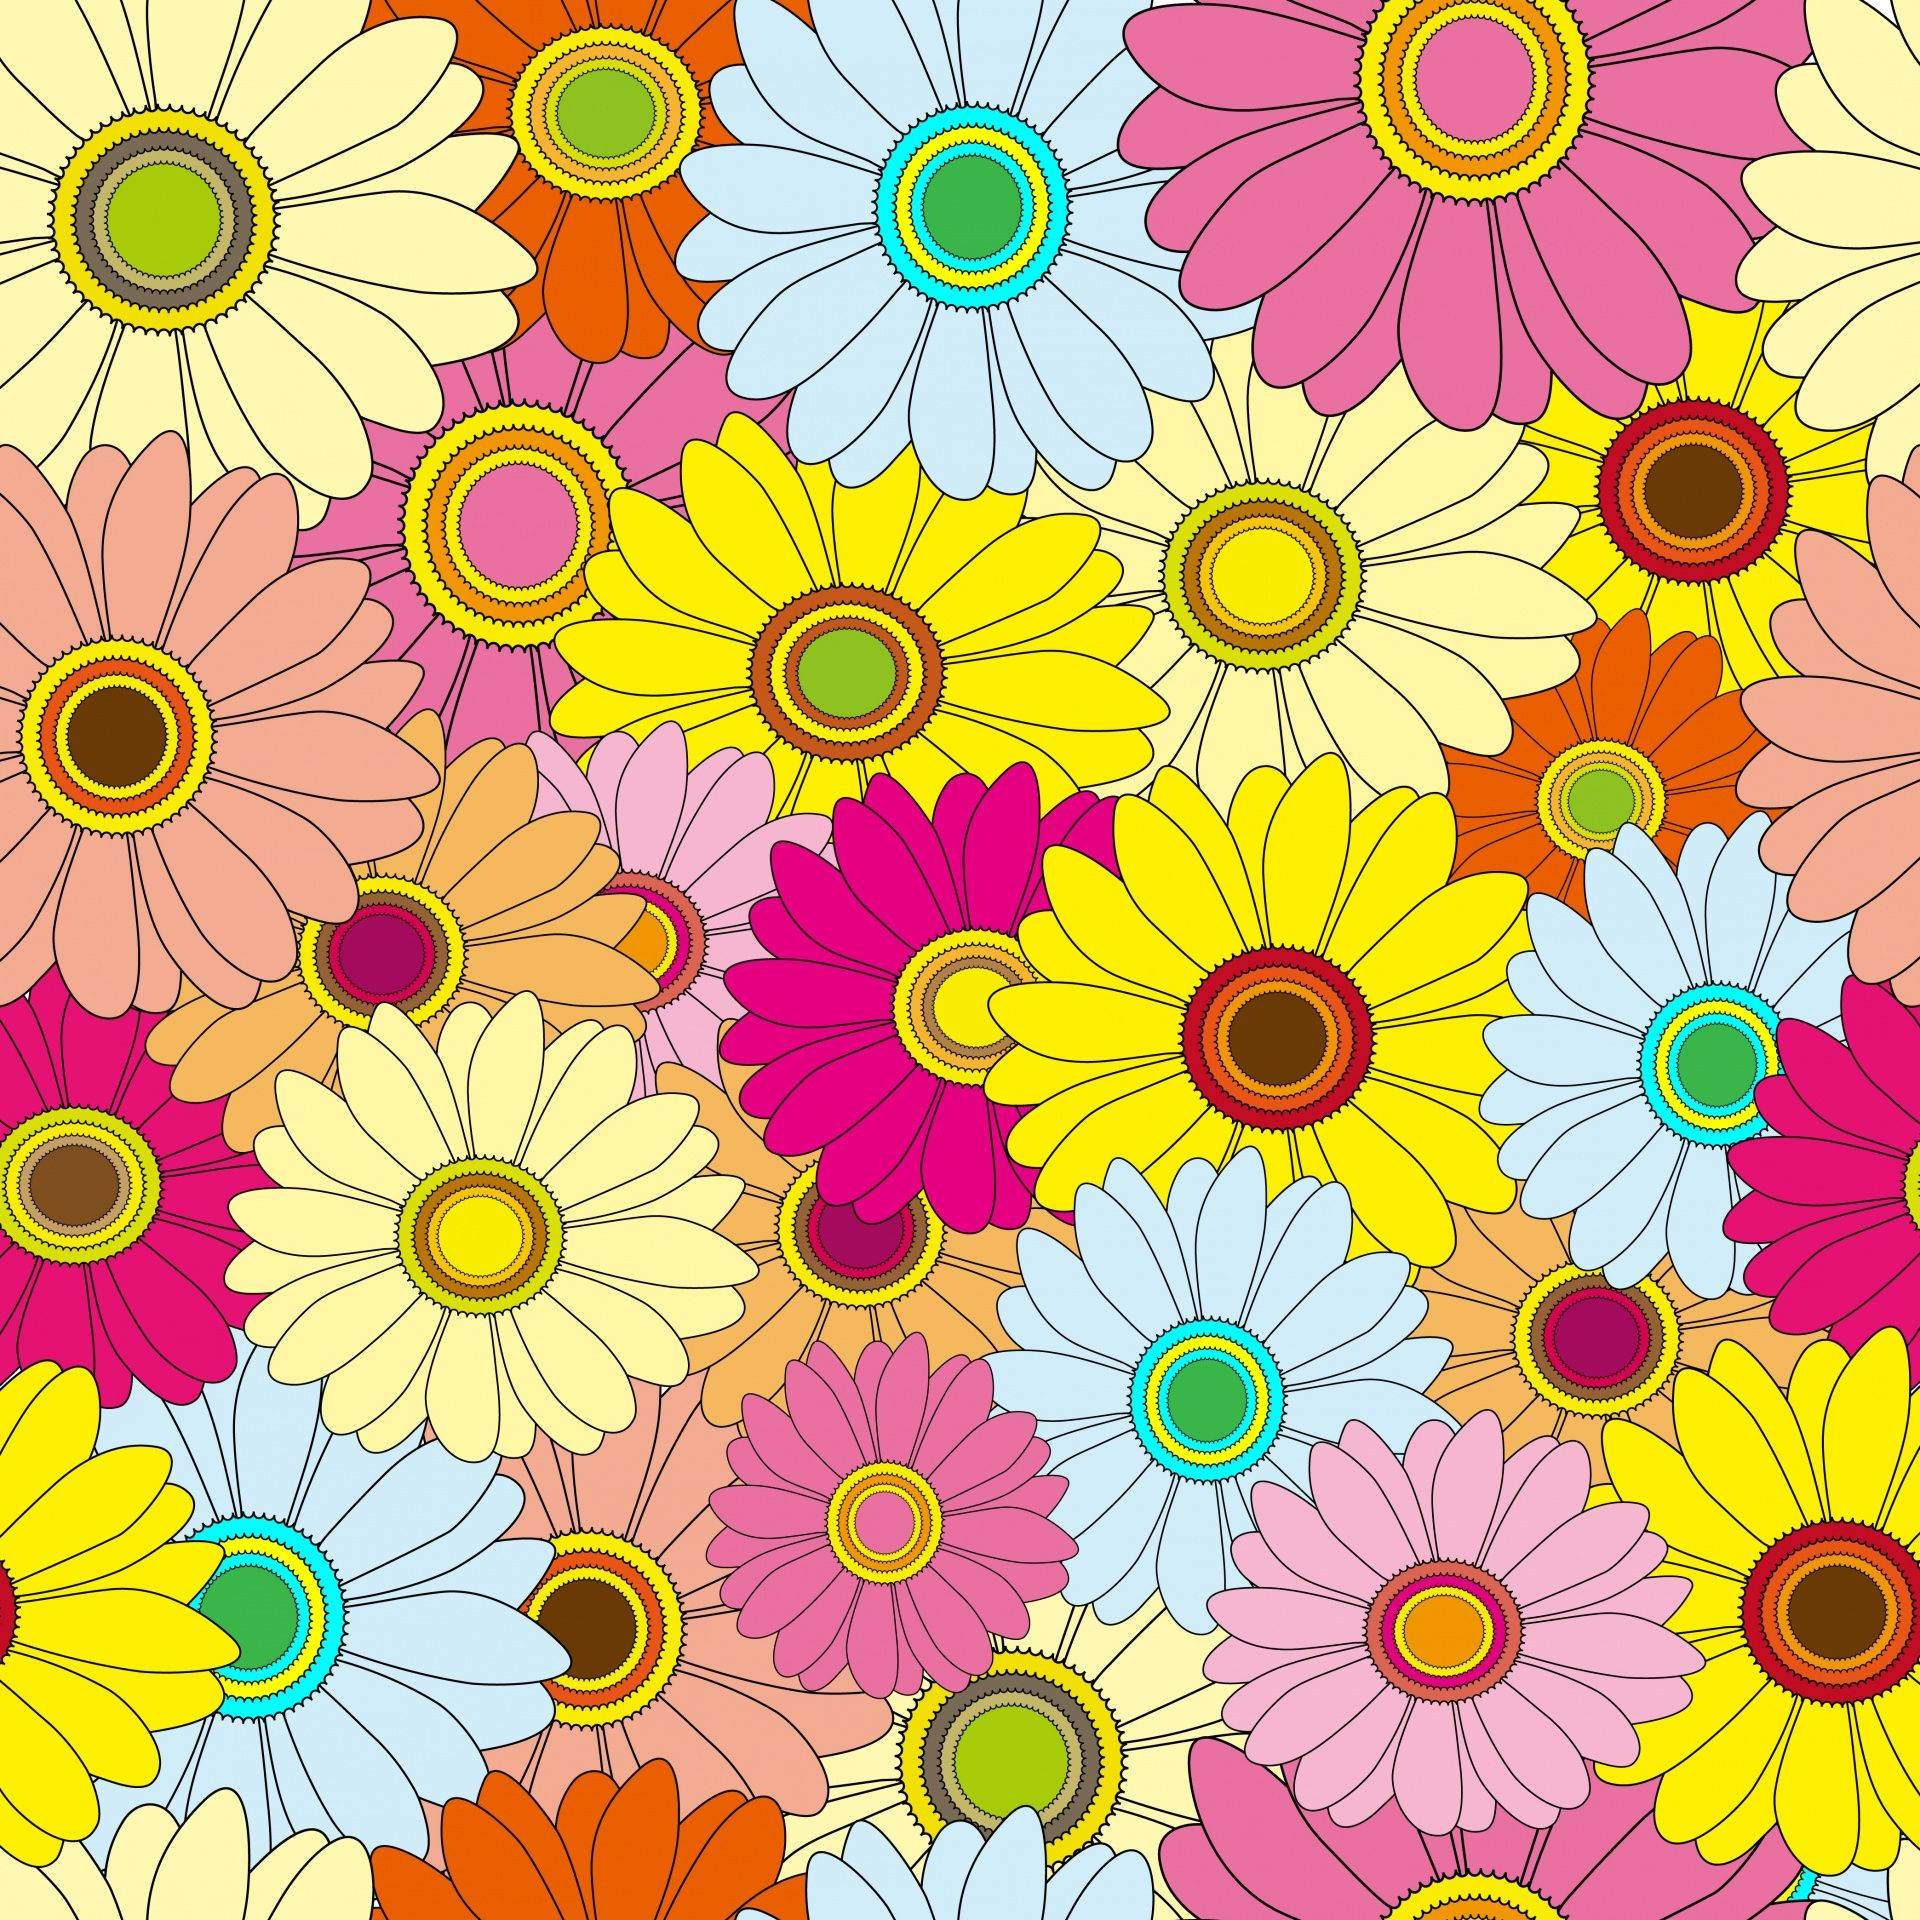 Free Floral Wallpaper Downloads, [500+] Floral Wallpapers for FREE |  